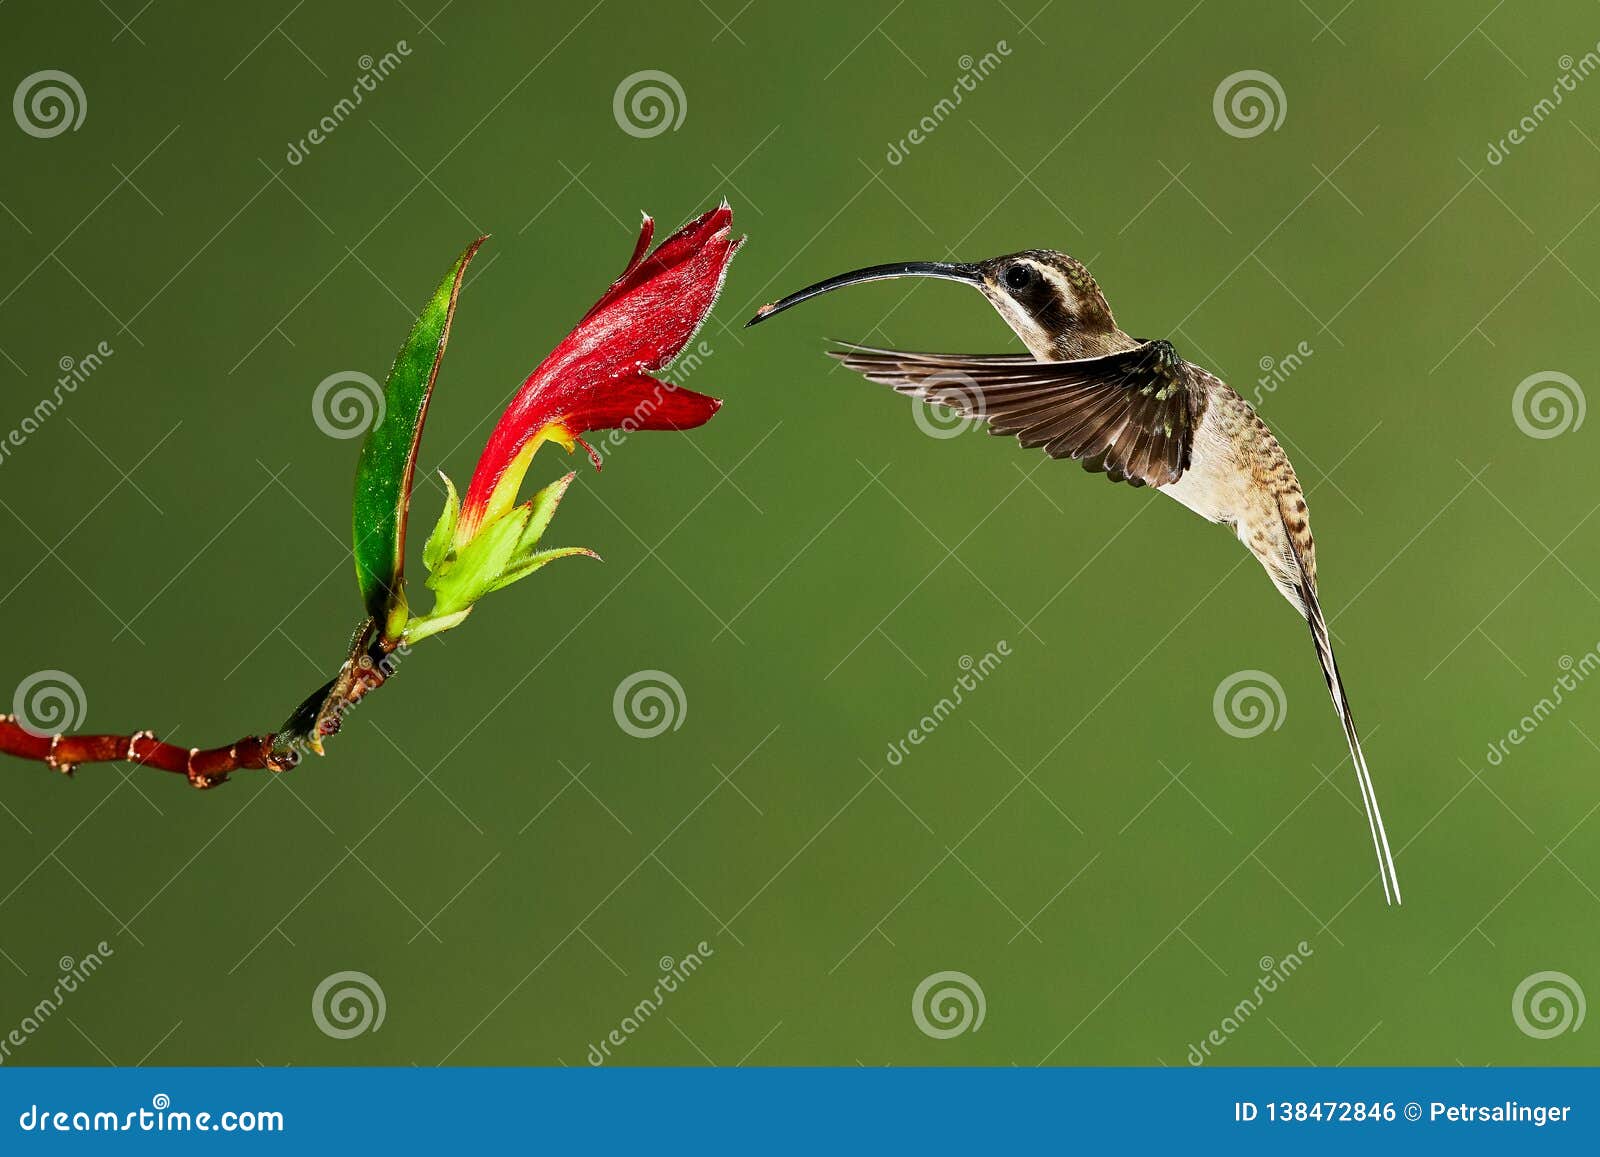 the long-billed hermit phaethornis longirostris photographed in costa rica. wildlife scene form rain forest.